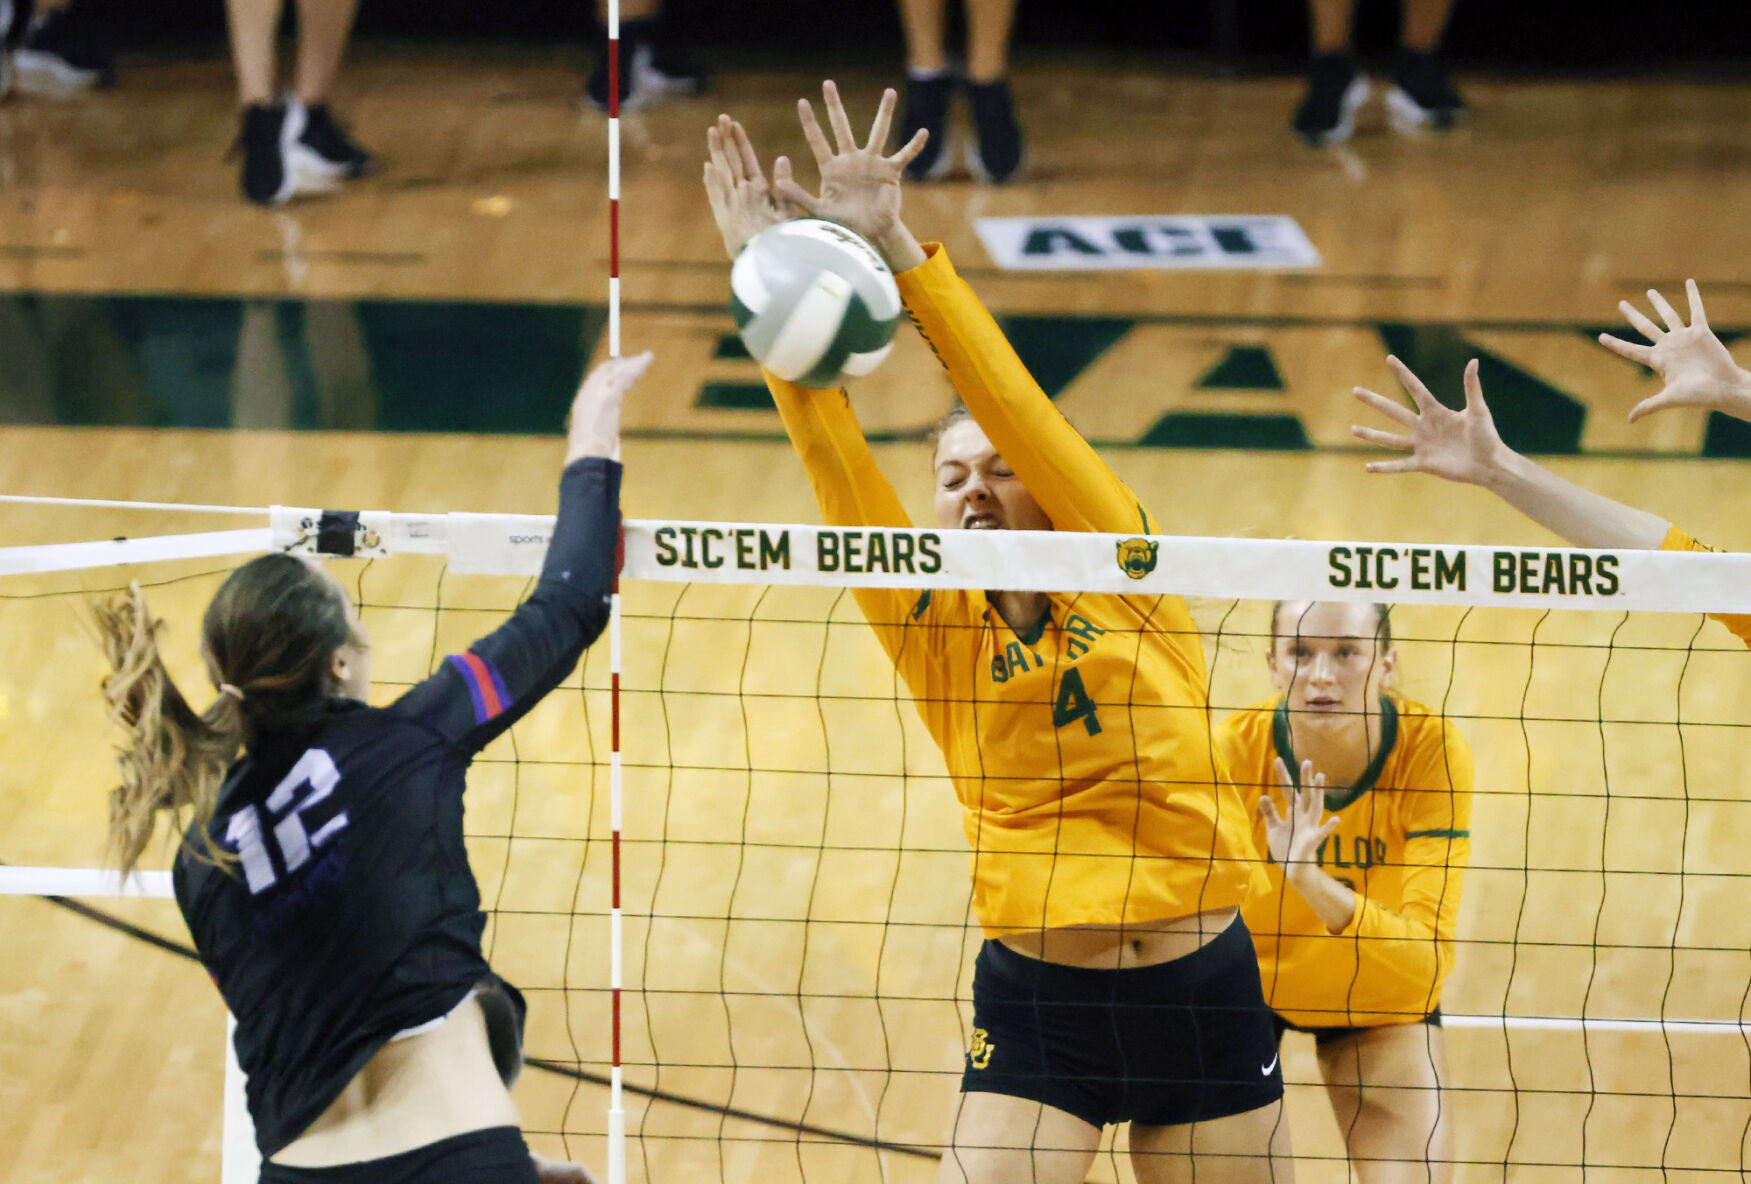 Baylor volleyball taking on Iowa State in national TV match